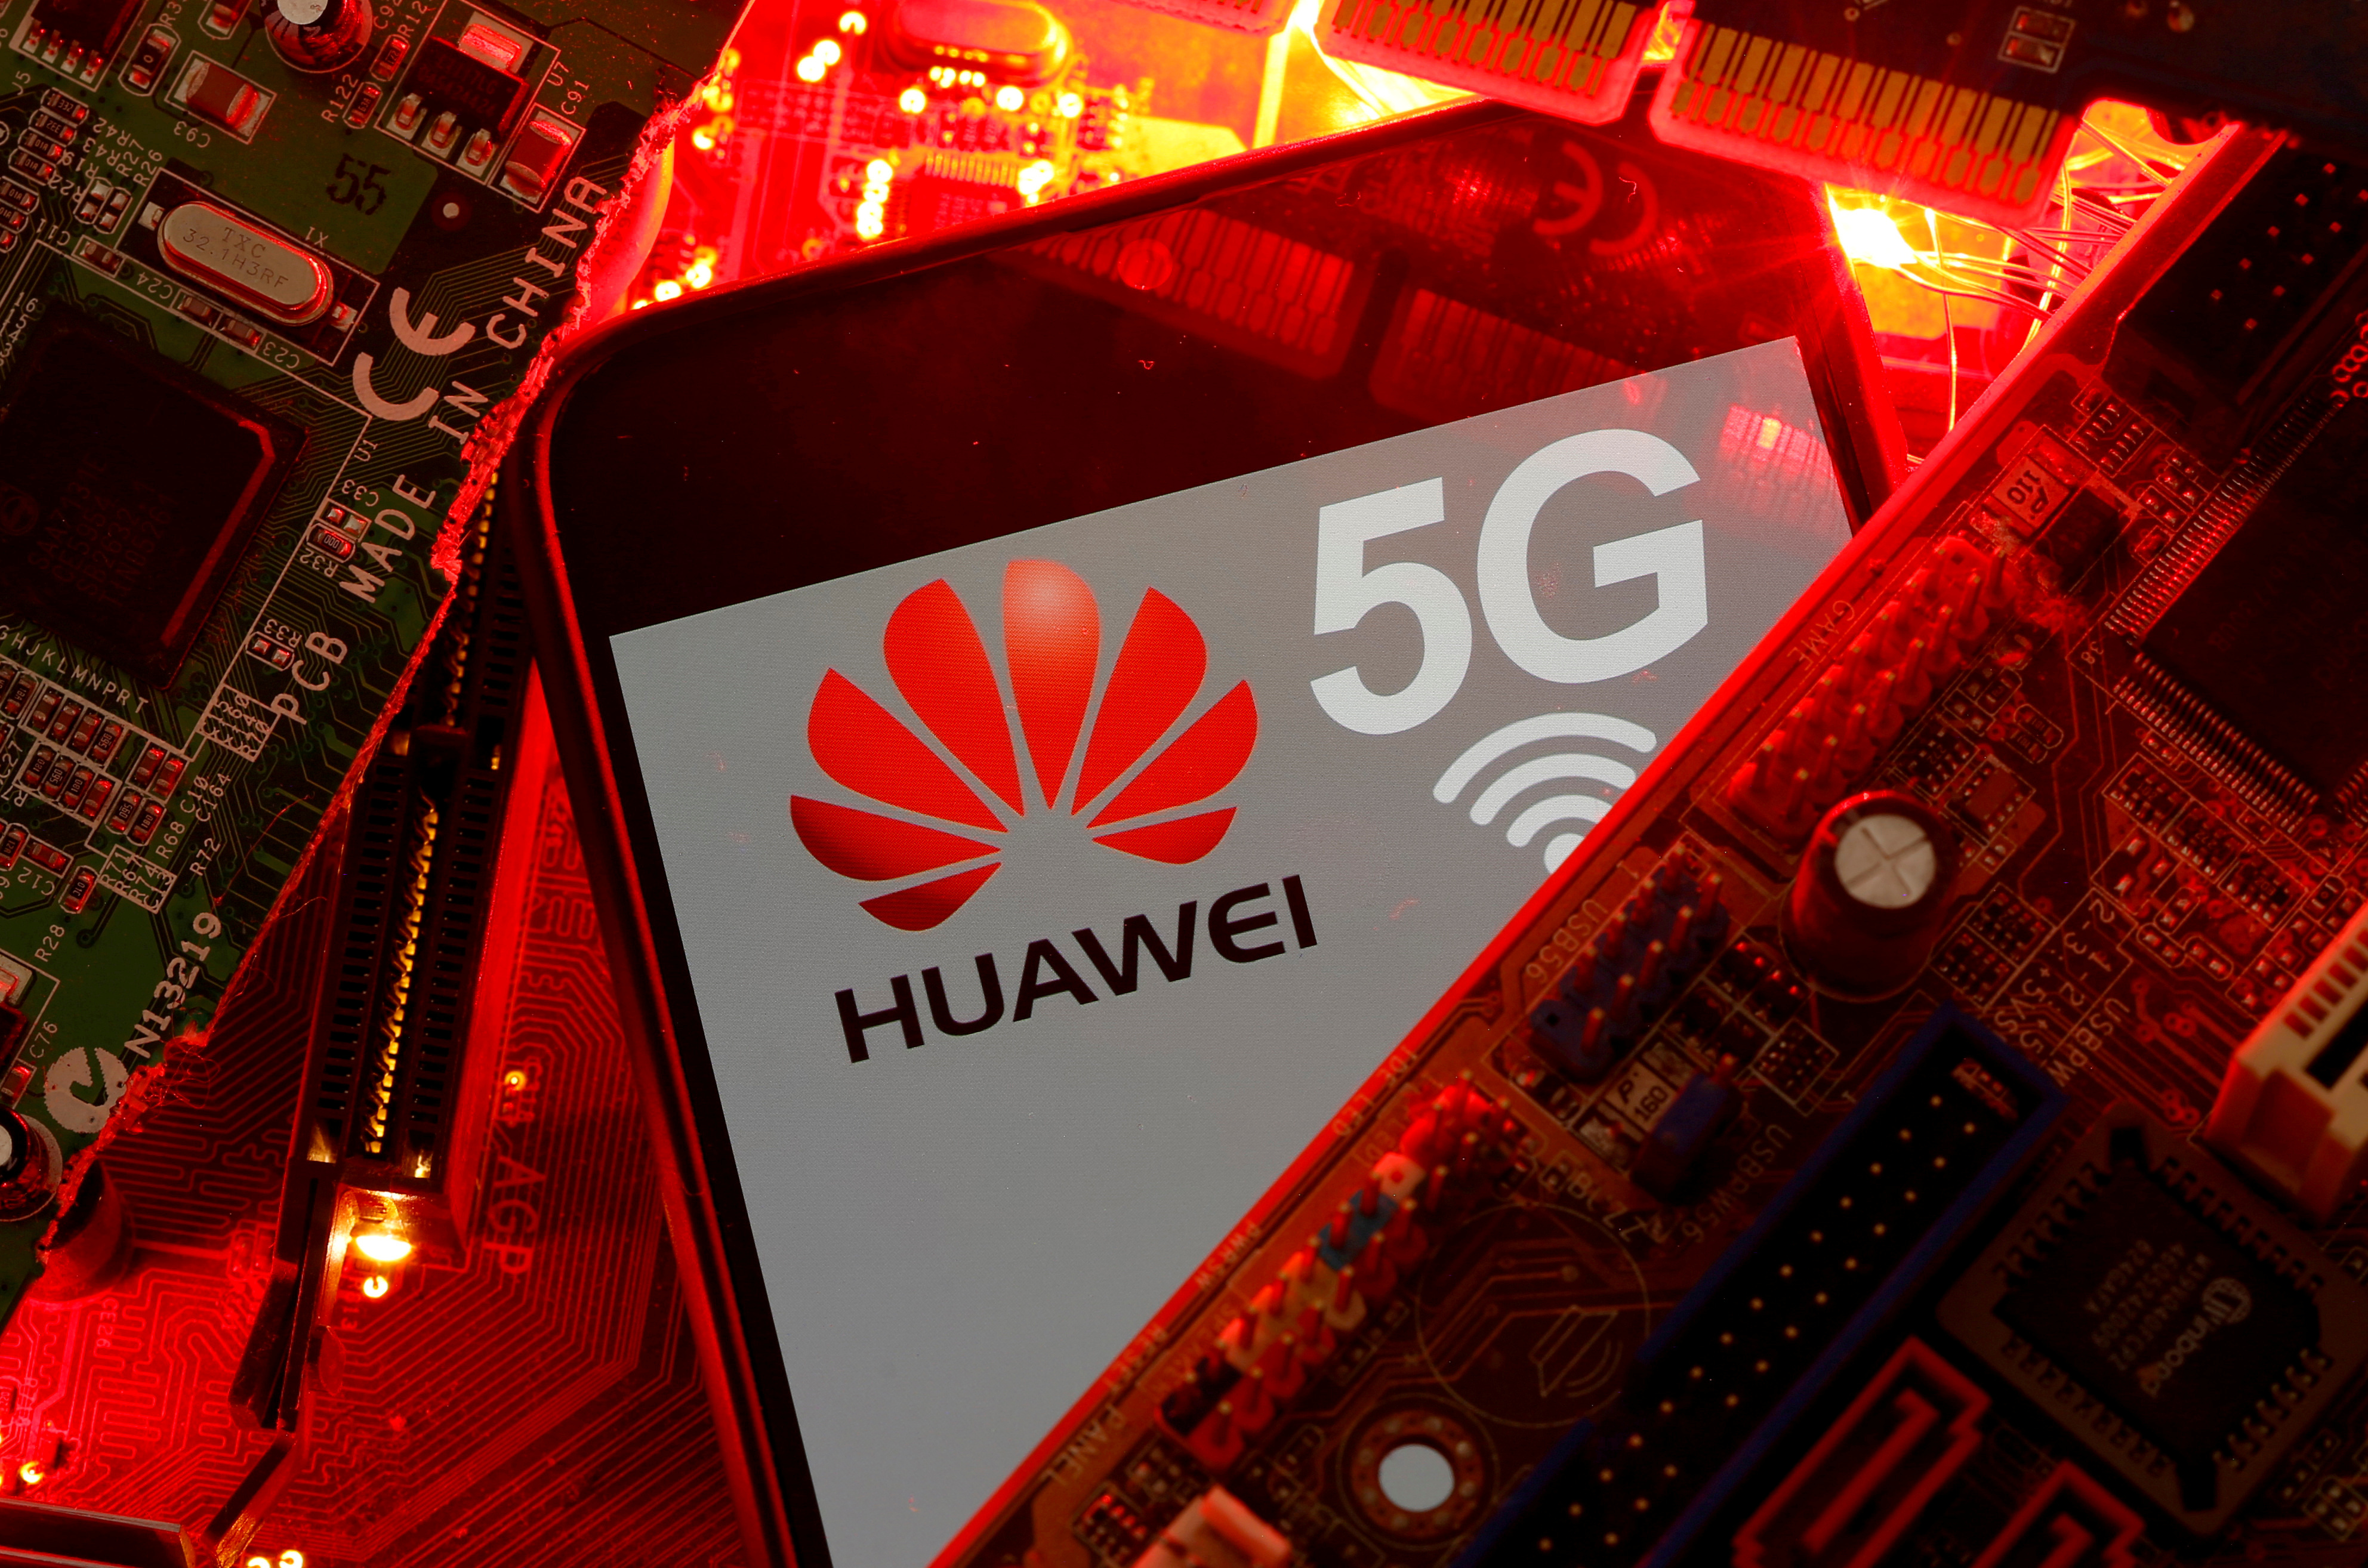 A smartphone with the Huawei and 5G network logo is seen on a PC motherboard in this illustration